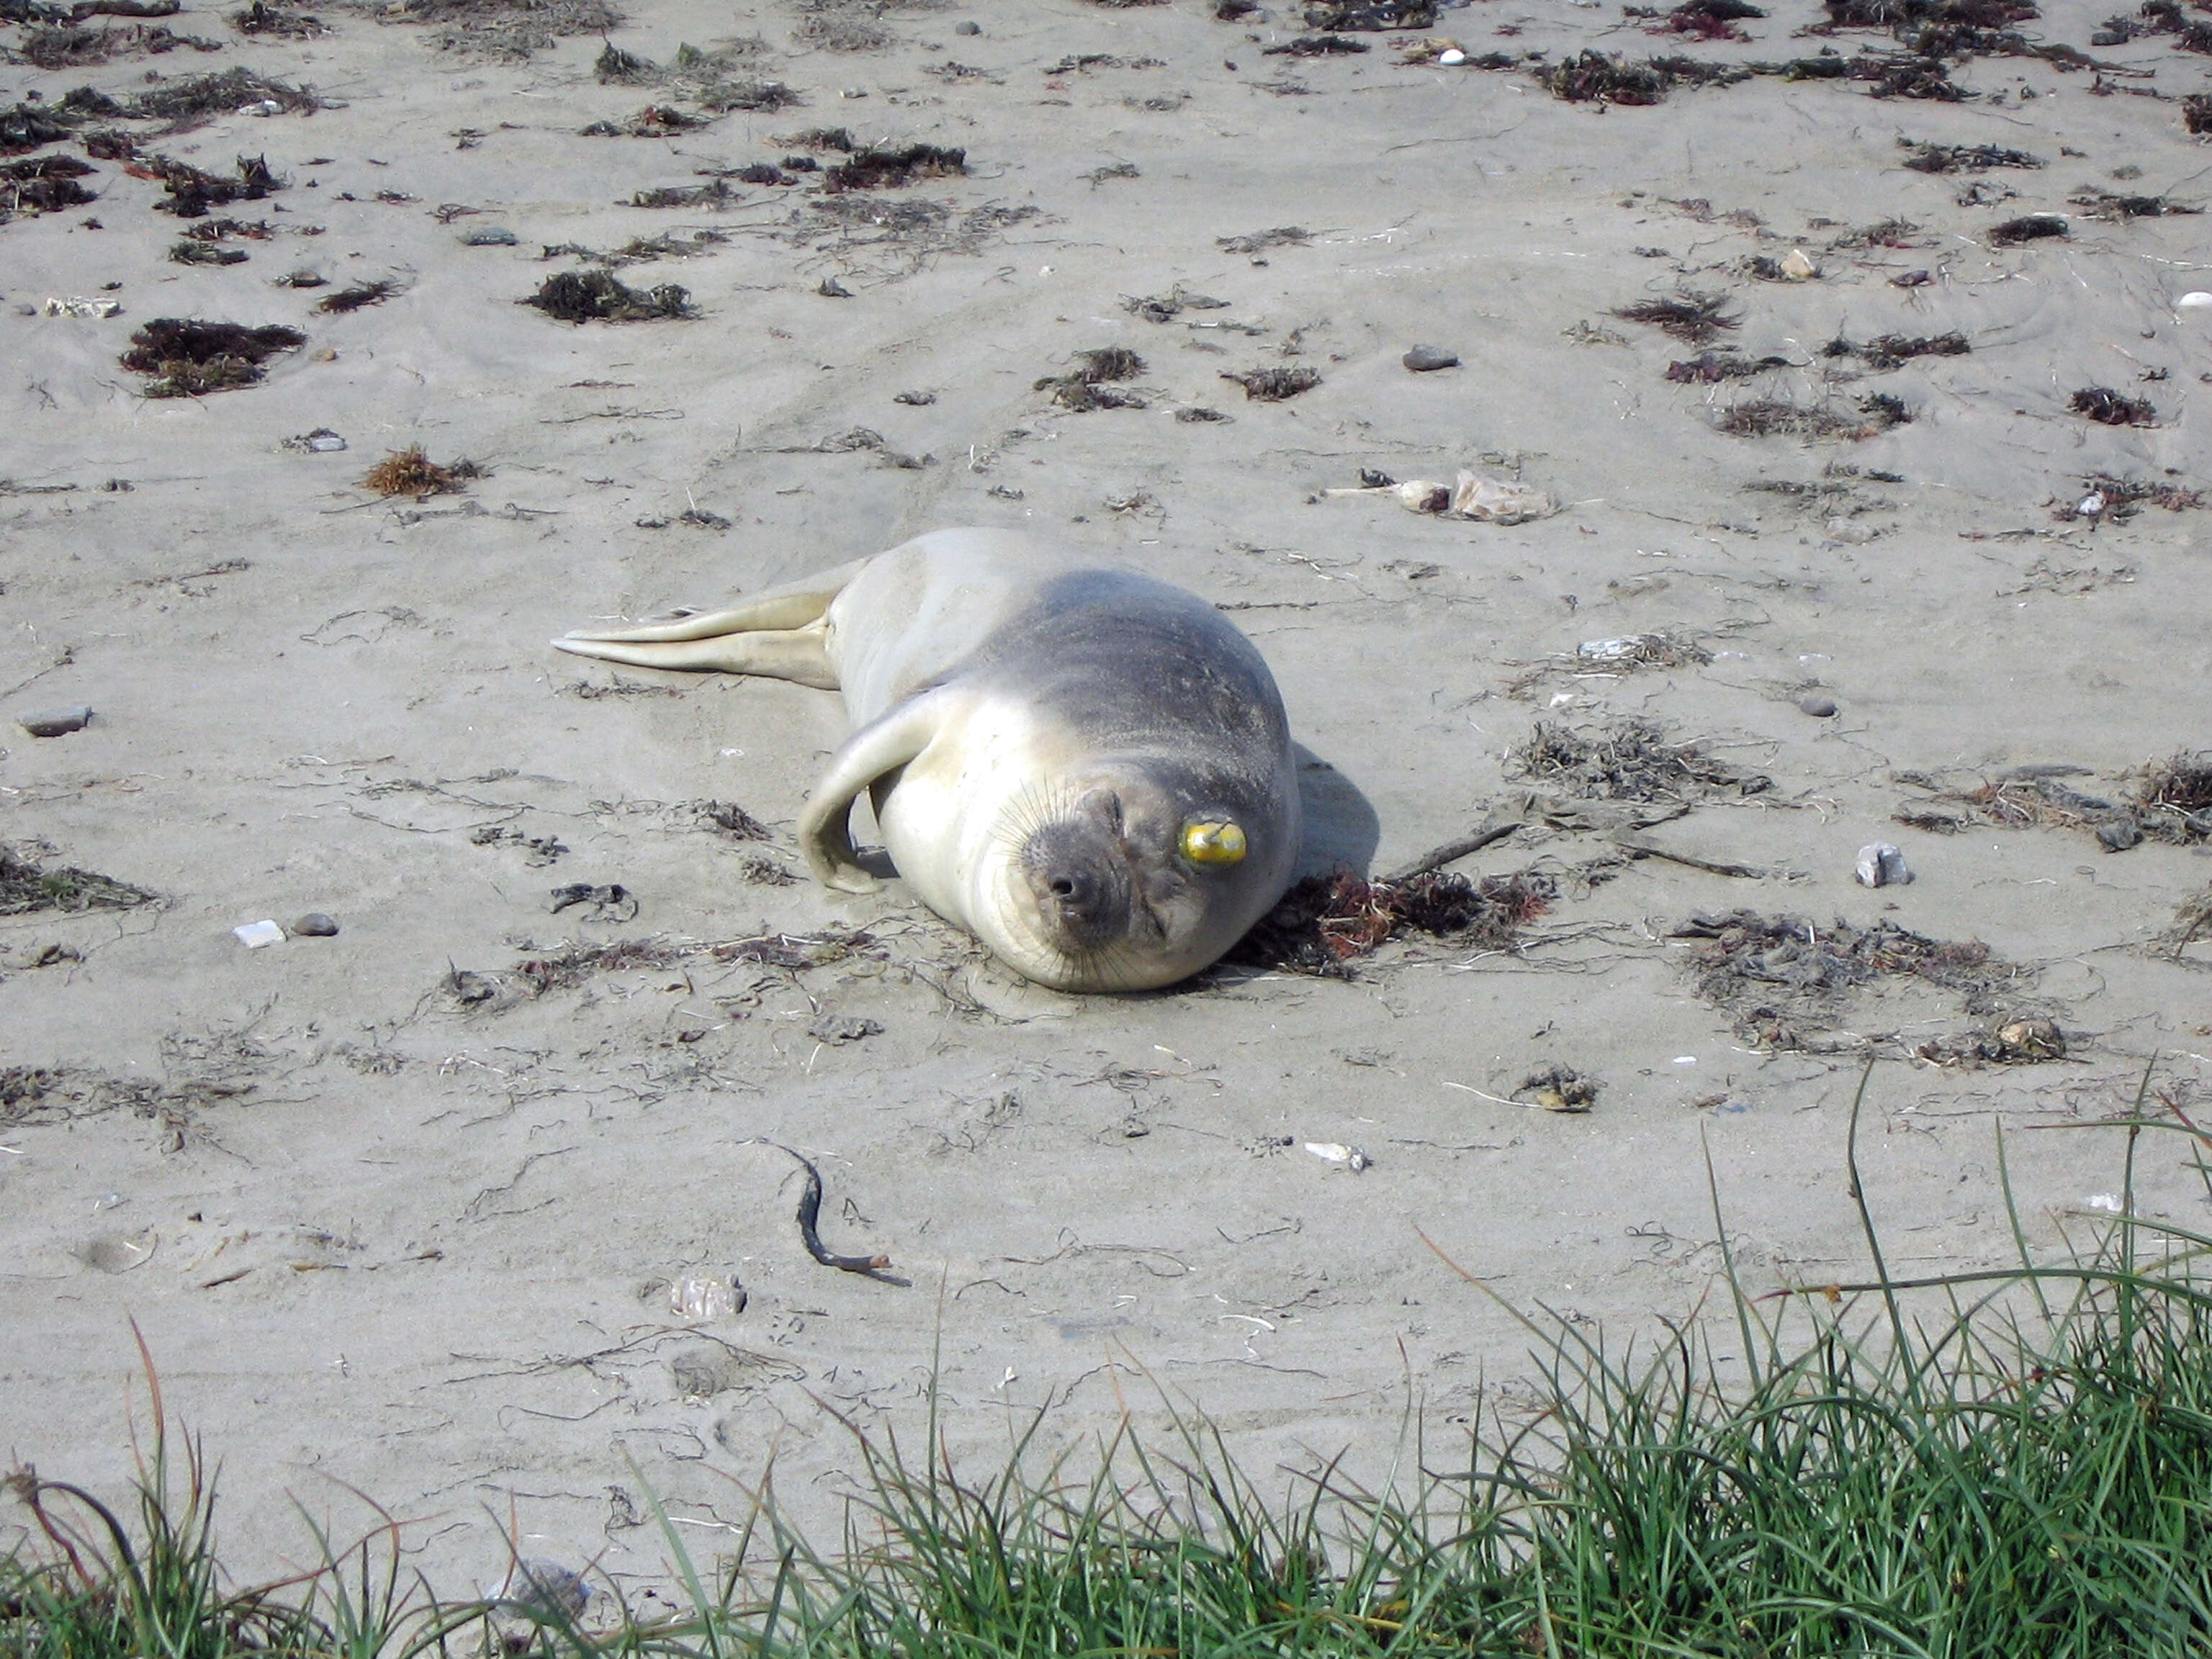 Image of Northern Elephant Seal